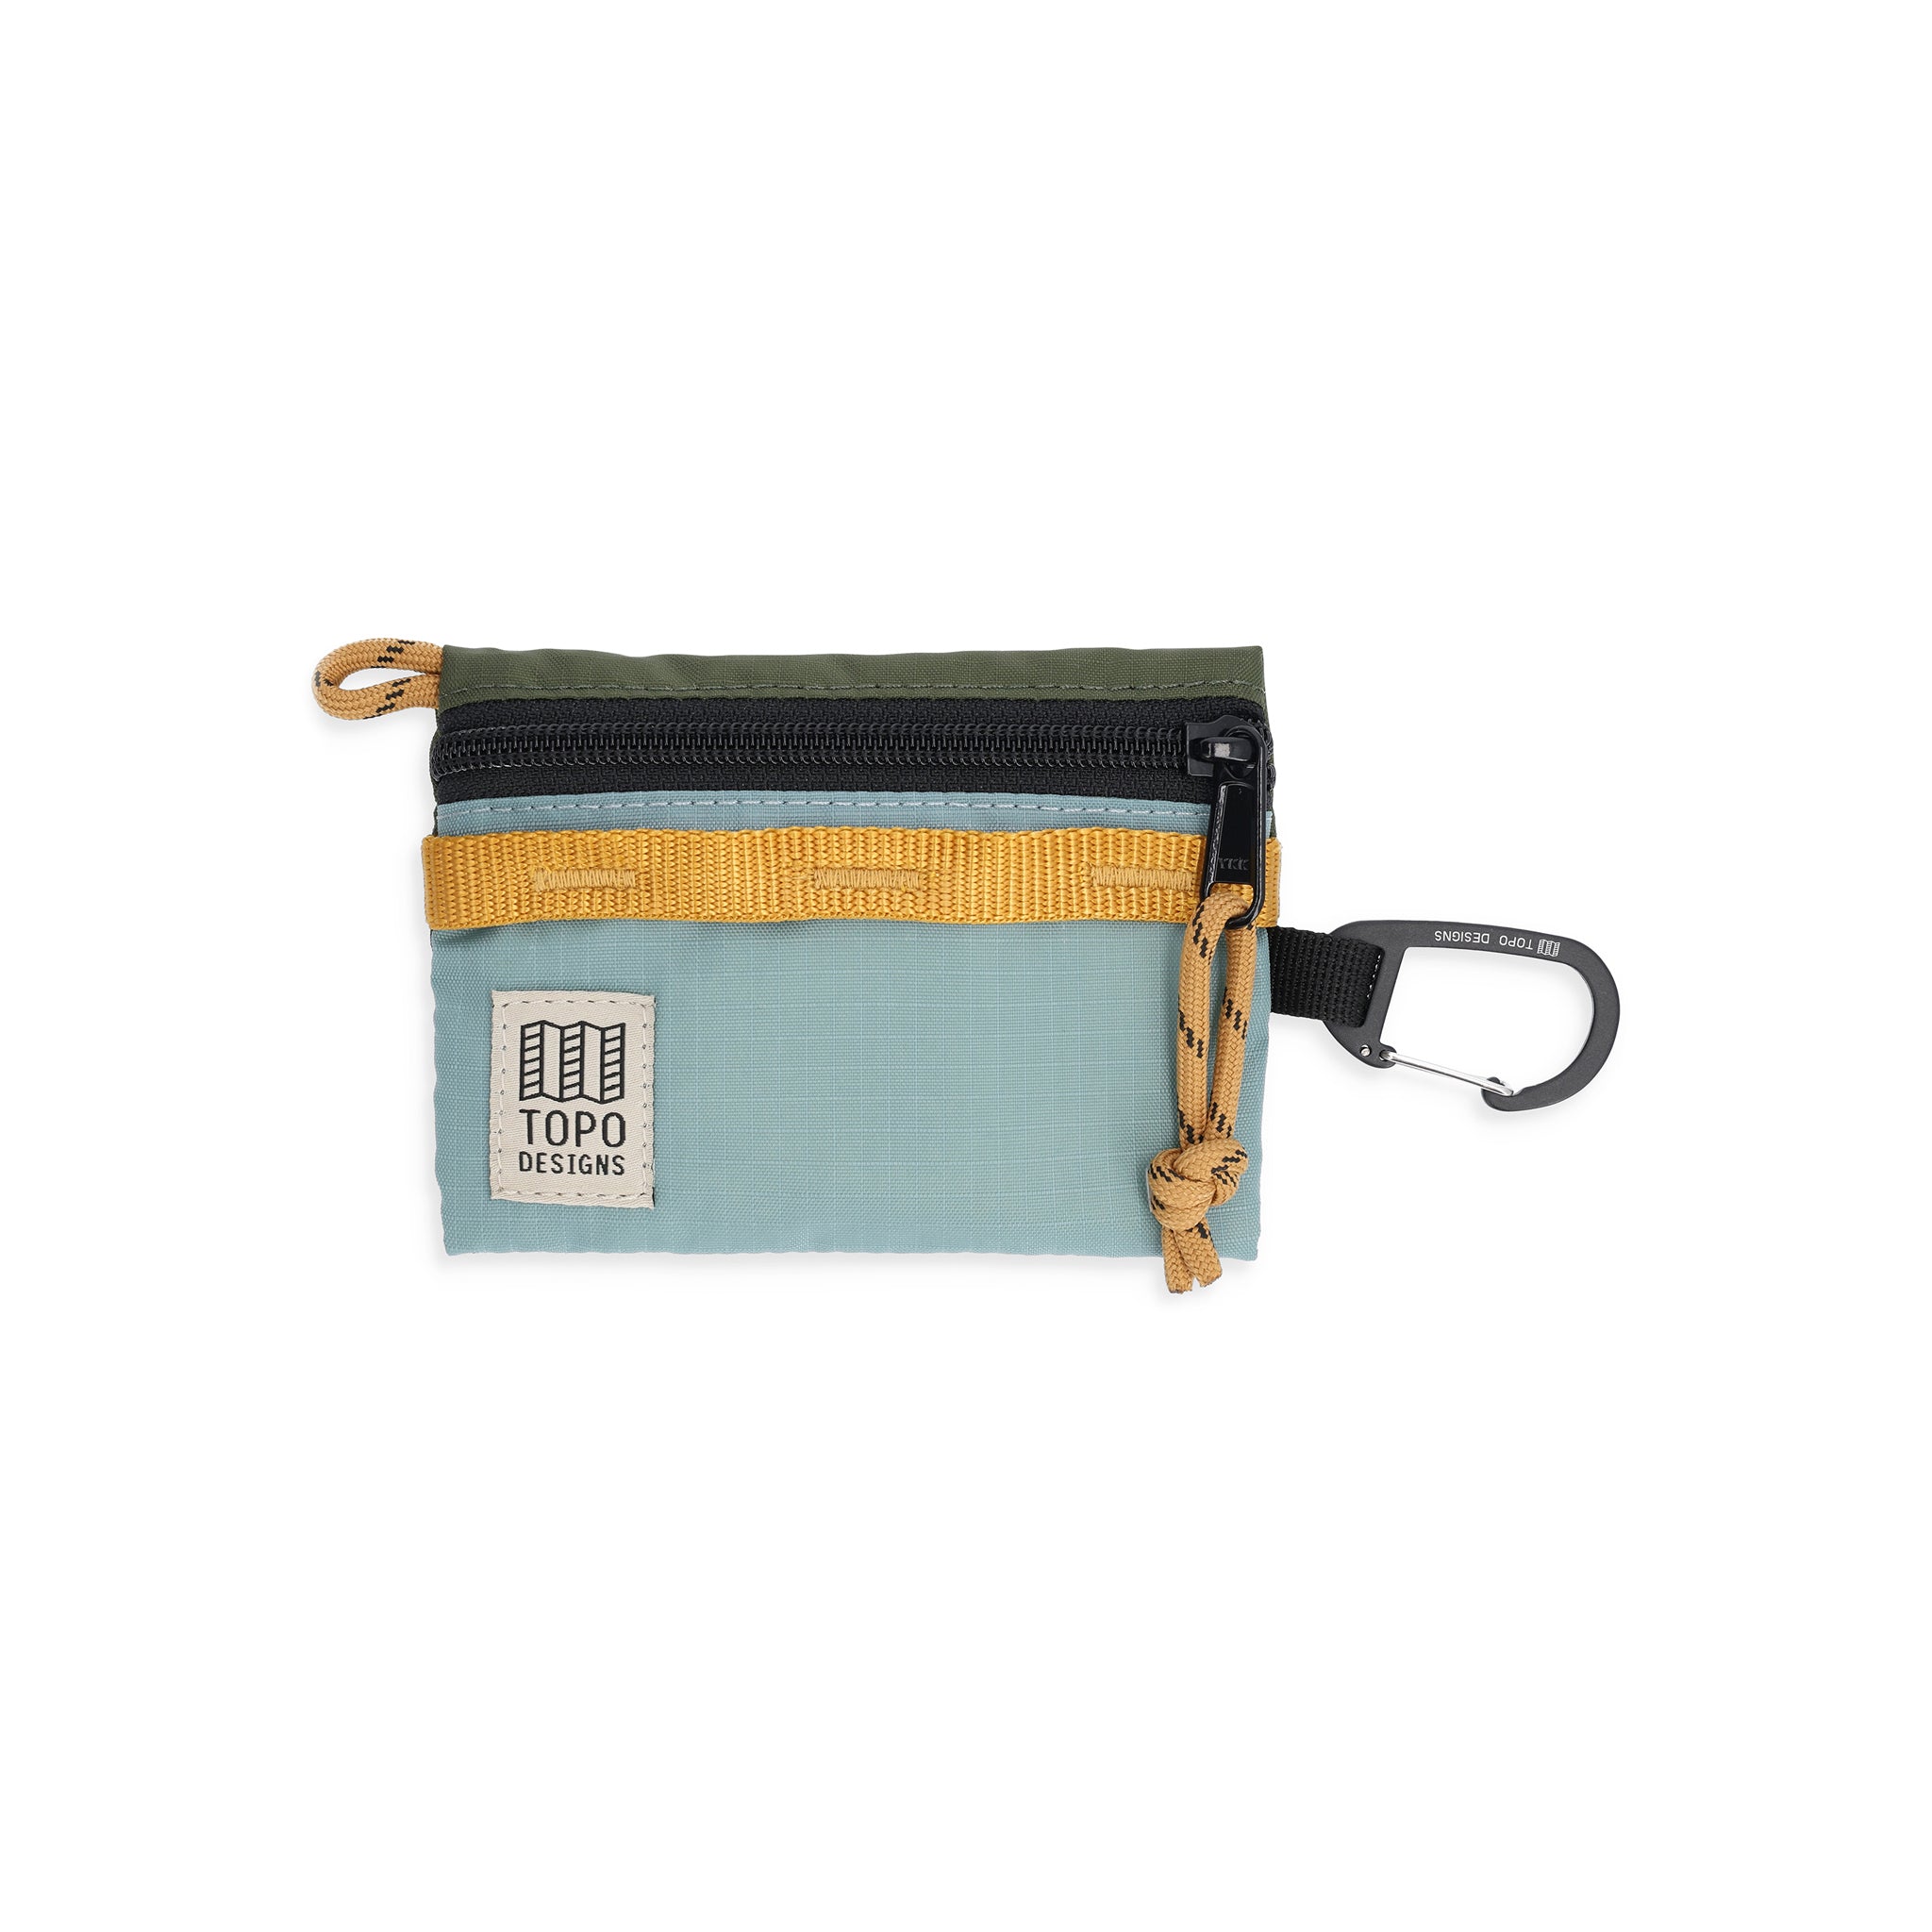 The Leather Carabiner Mini Pouch